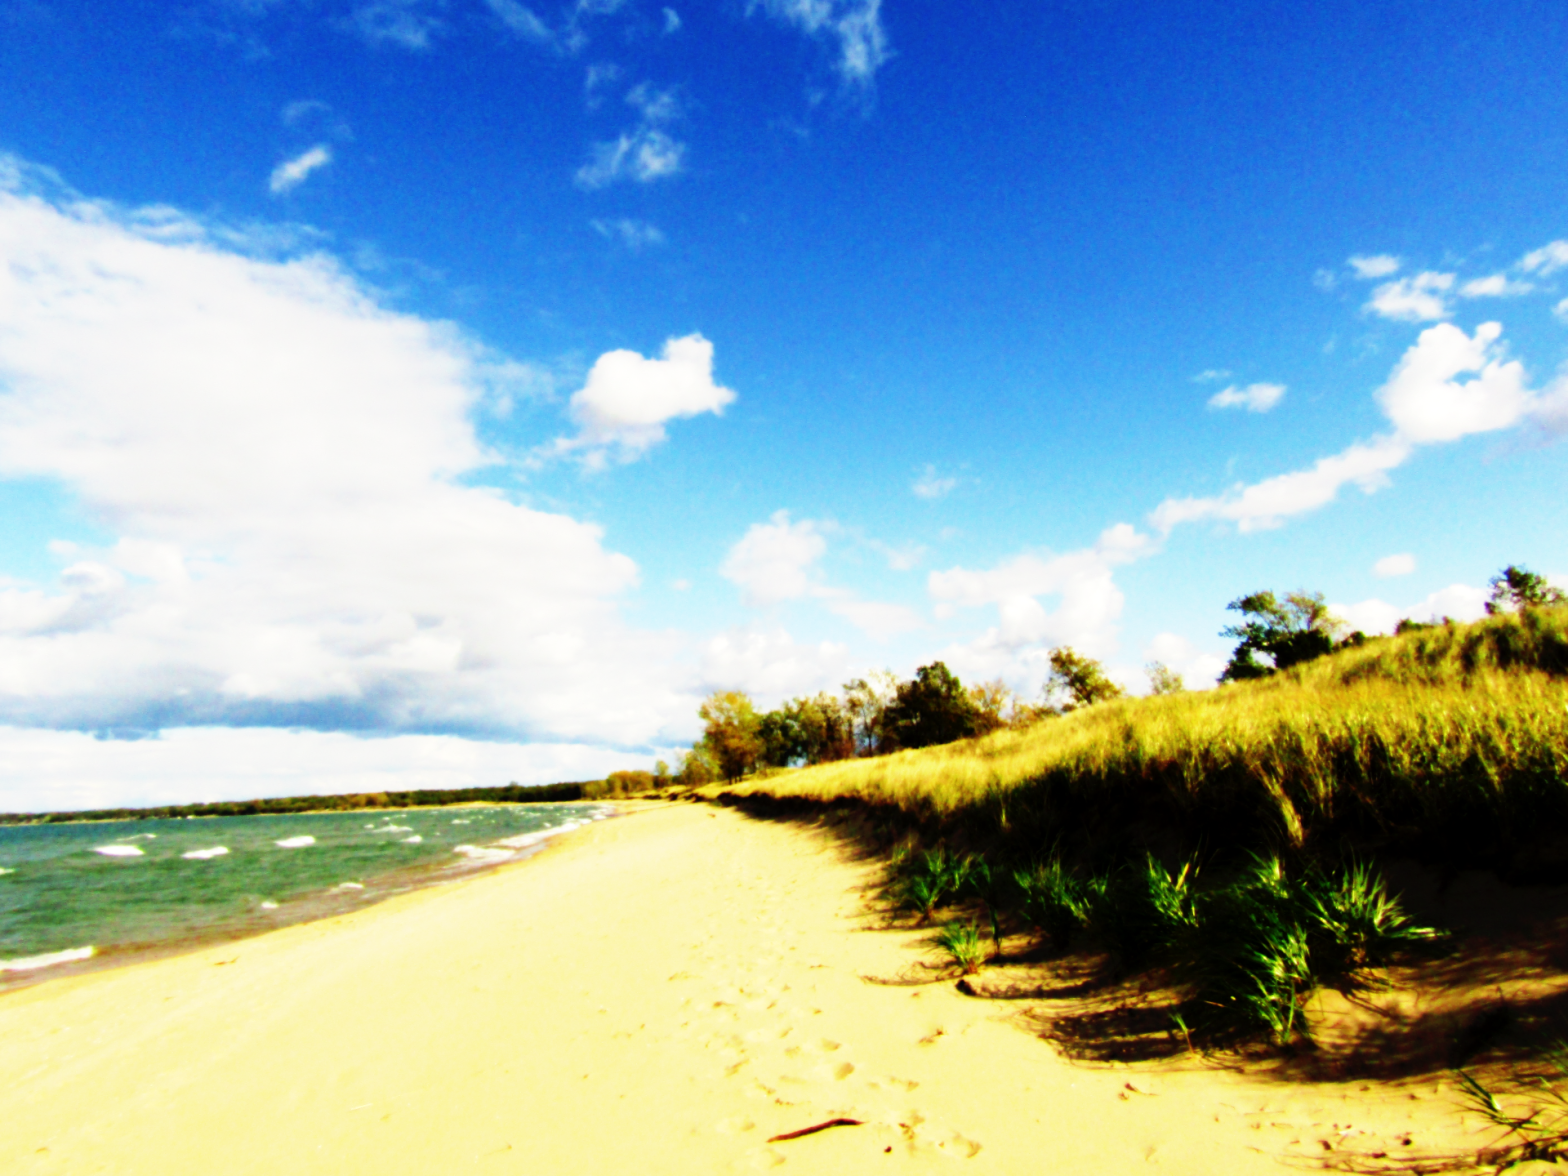 This long strech of michigan beach has been treated with the orton effect to give the image a dreamlike quality